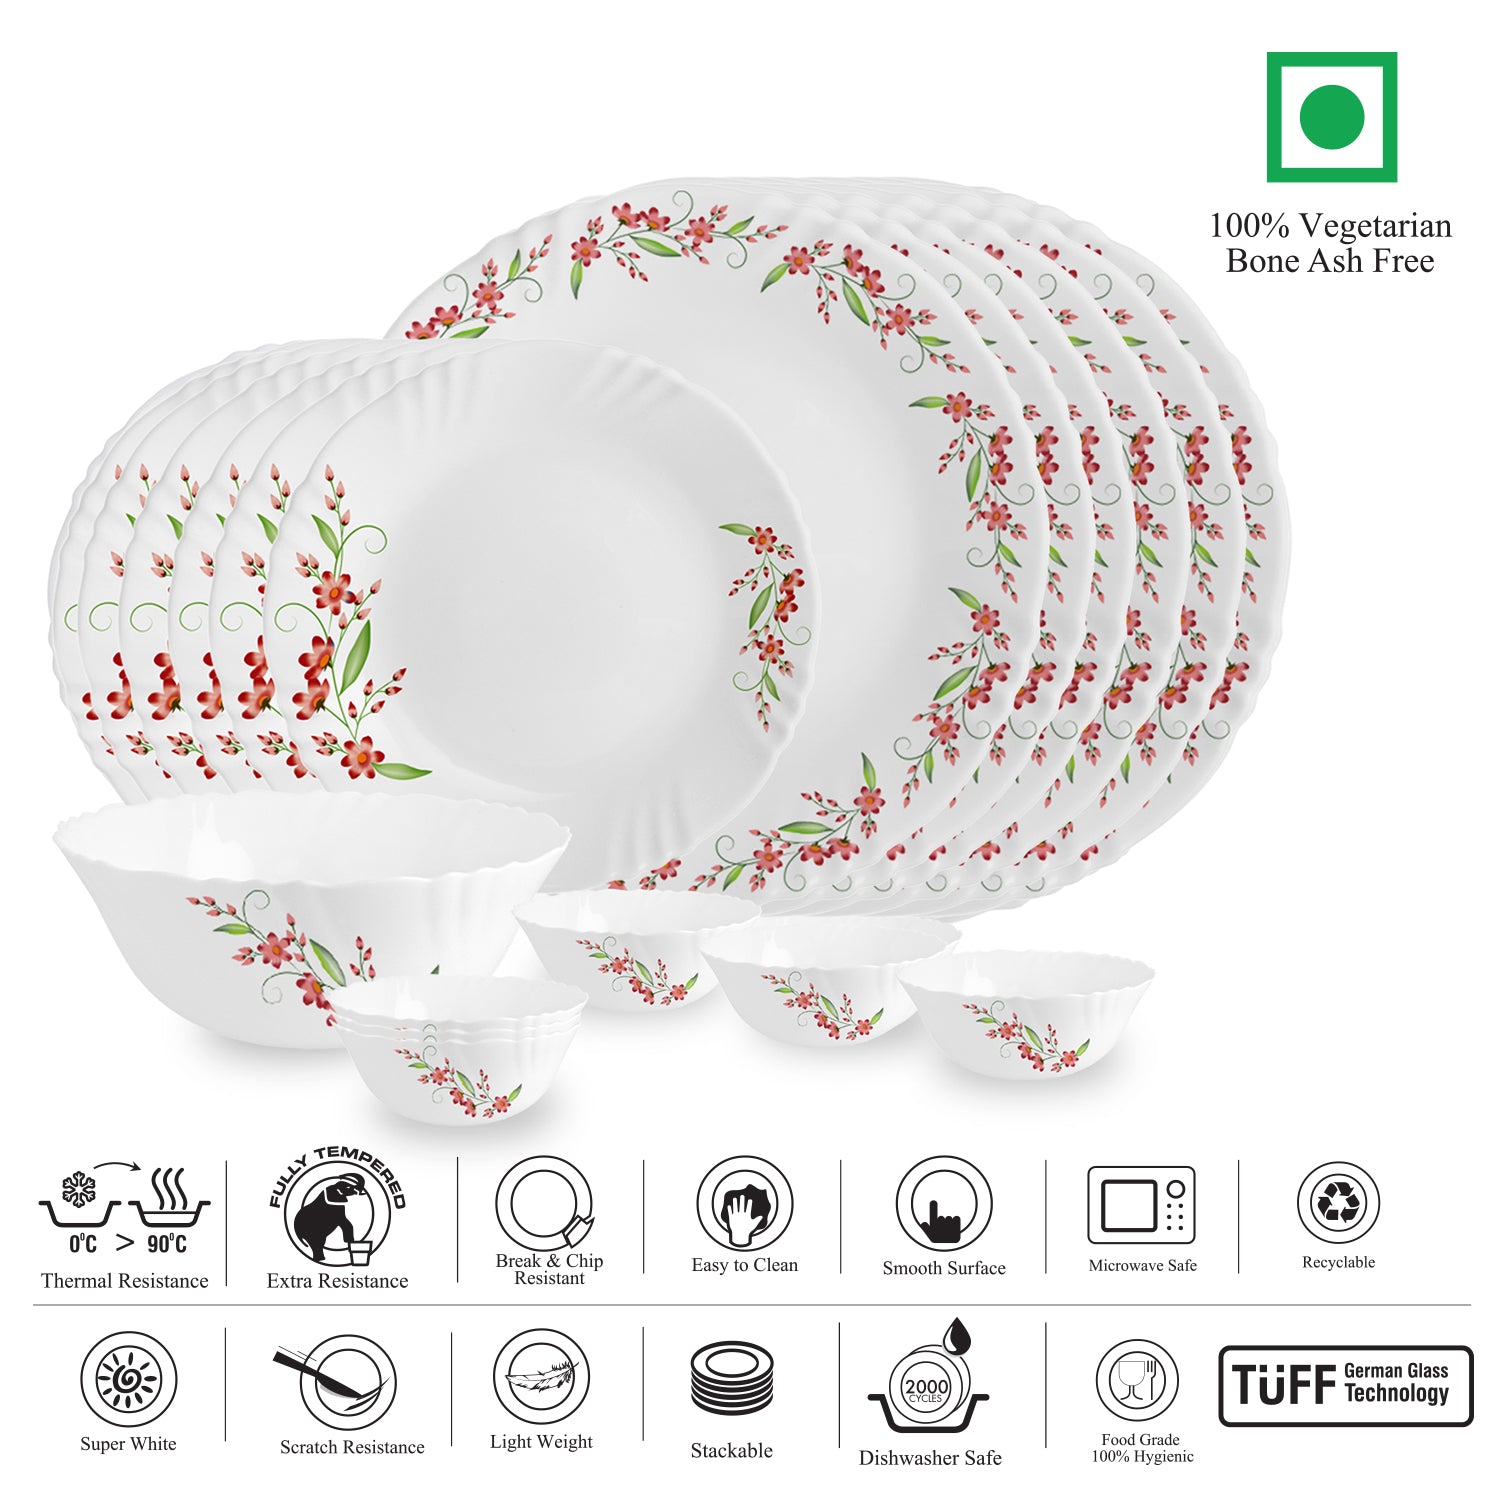 Imperial Series 19 Pieces Opalware Dinner Set for Family of 6 Cello Creeper